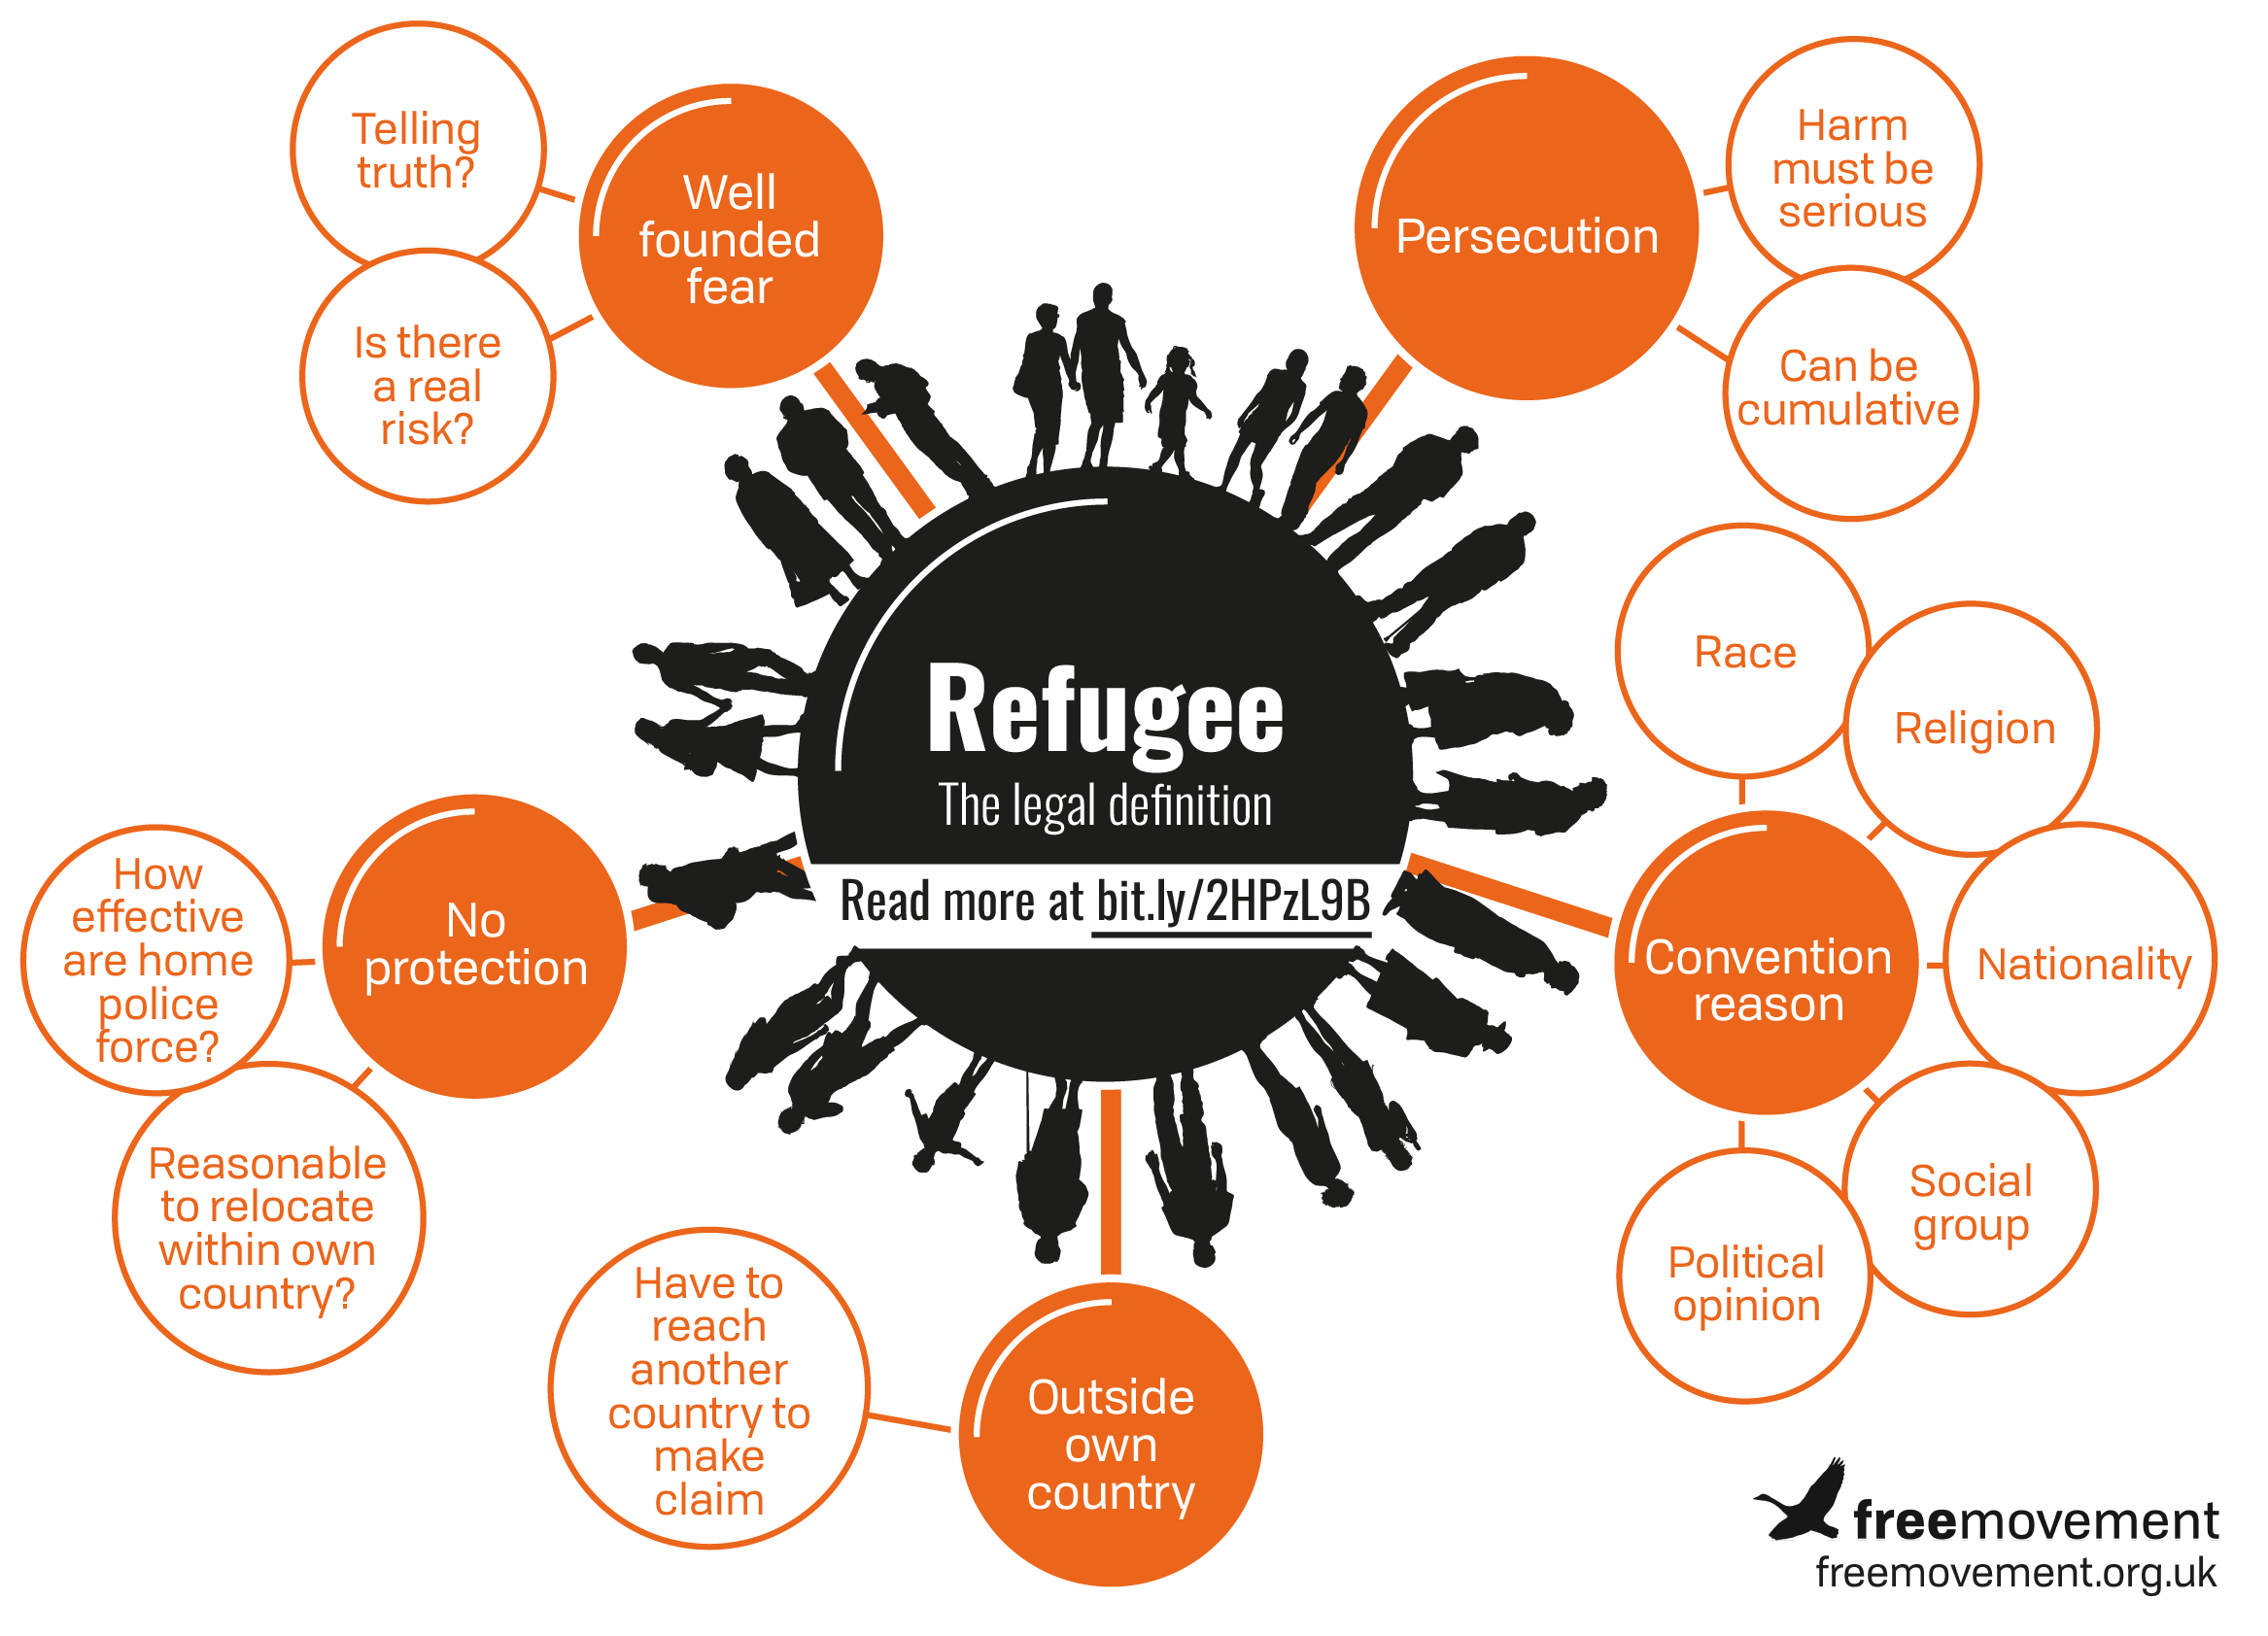 What is the legal definition of a “refugee”?